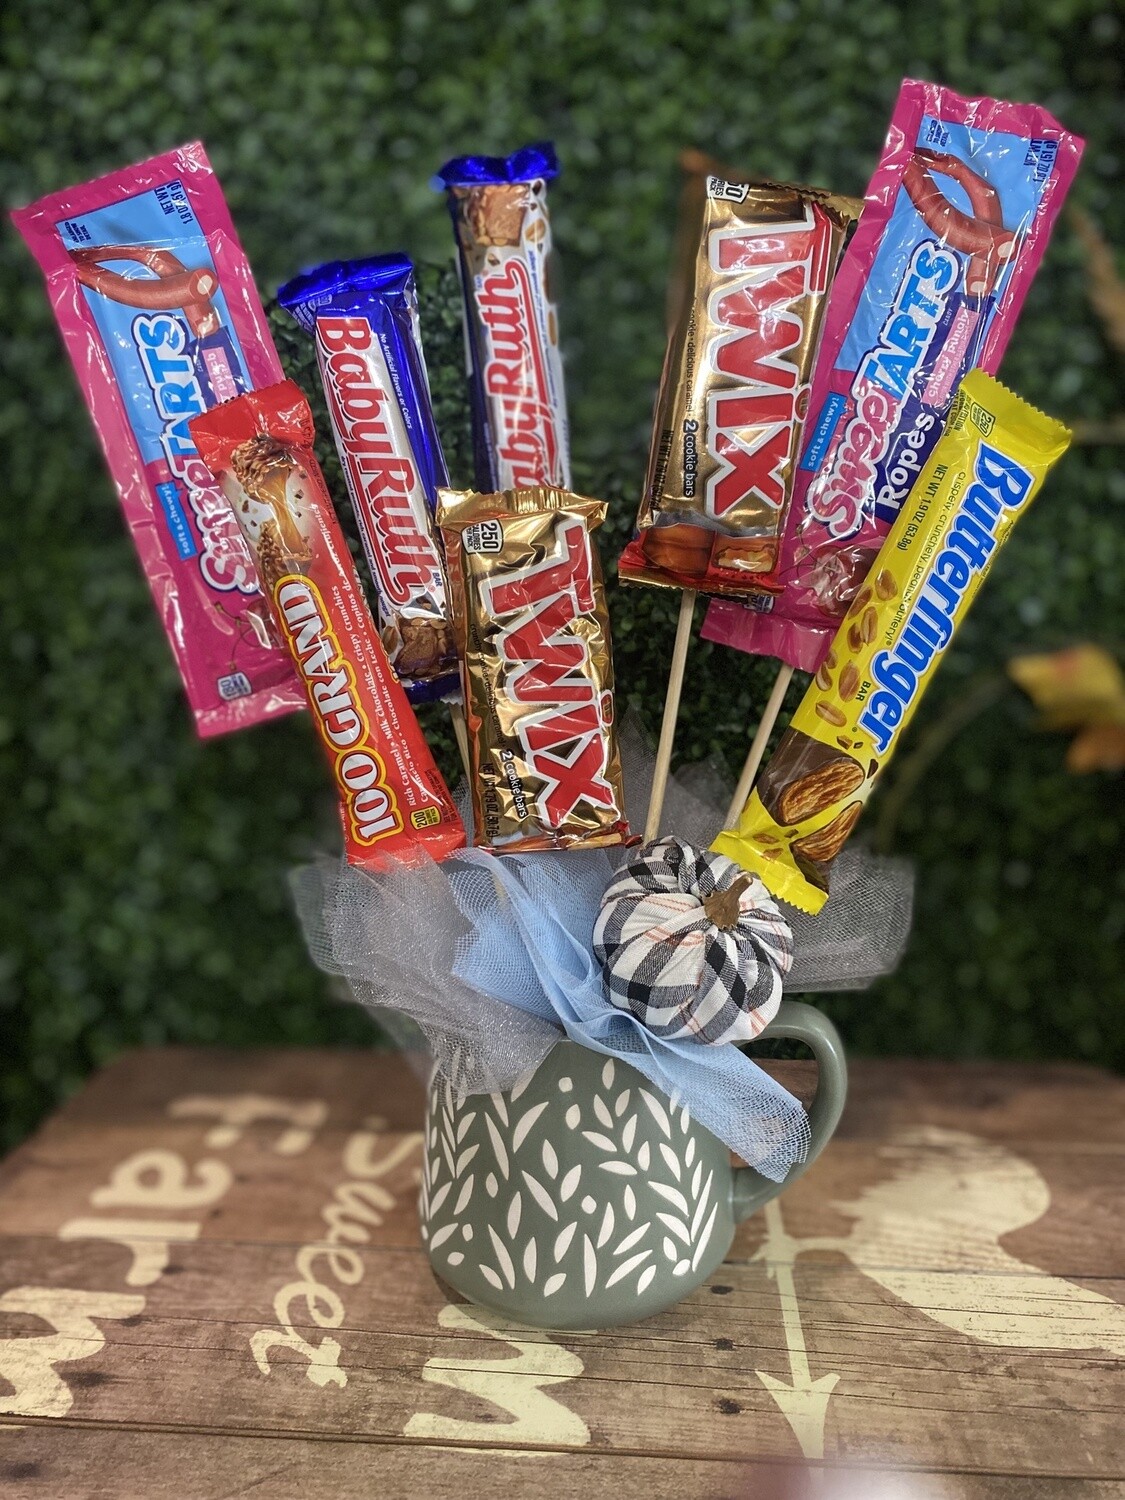 Candy Cups